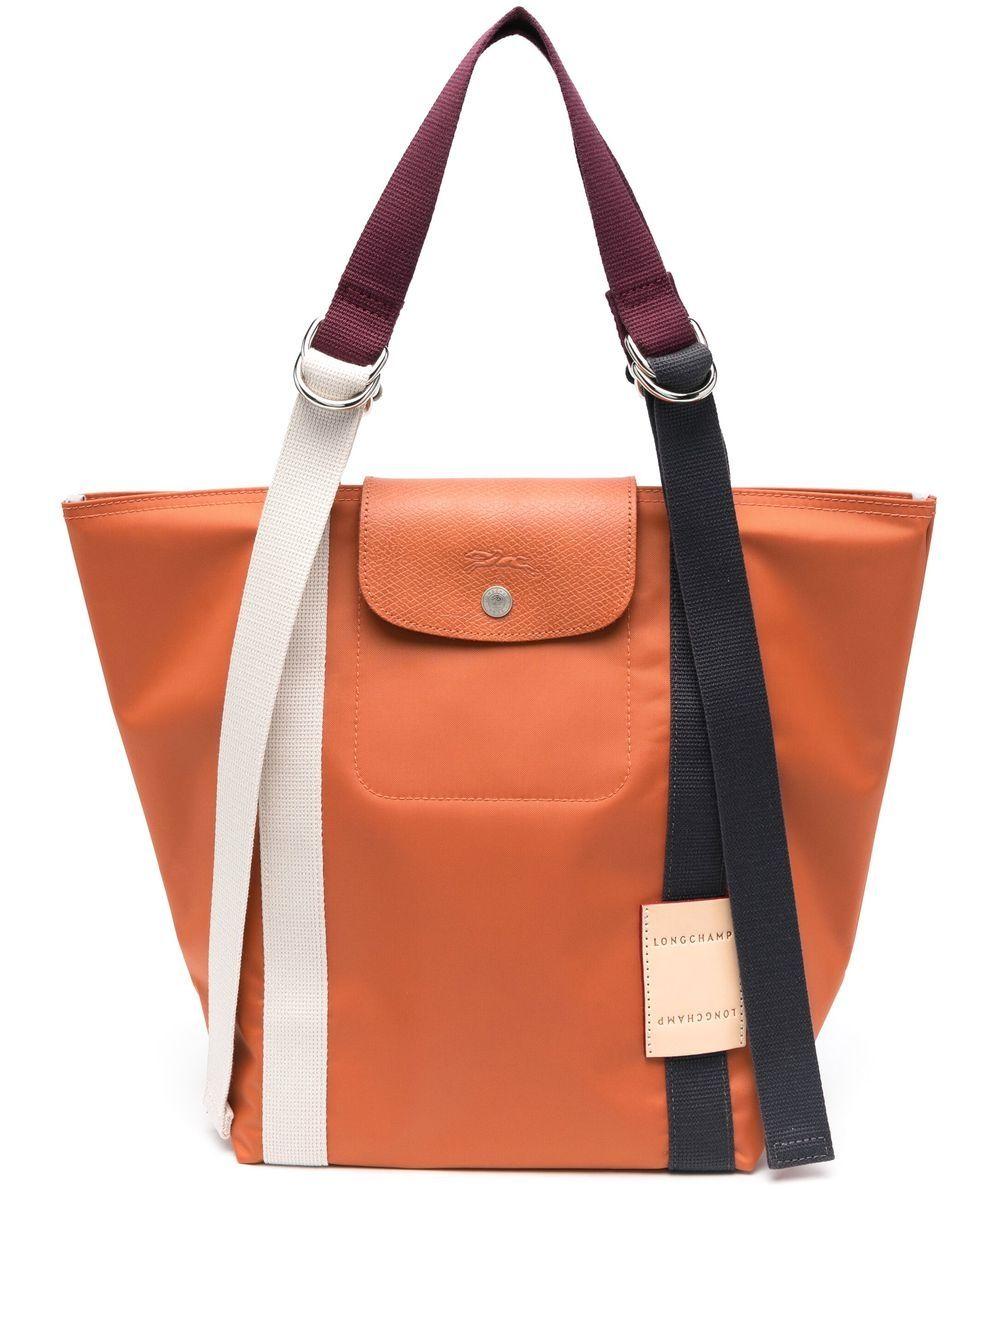 Longchamp Le Pliage Re-play Tote Bag in Orange | Lyst Canada